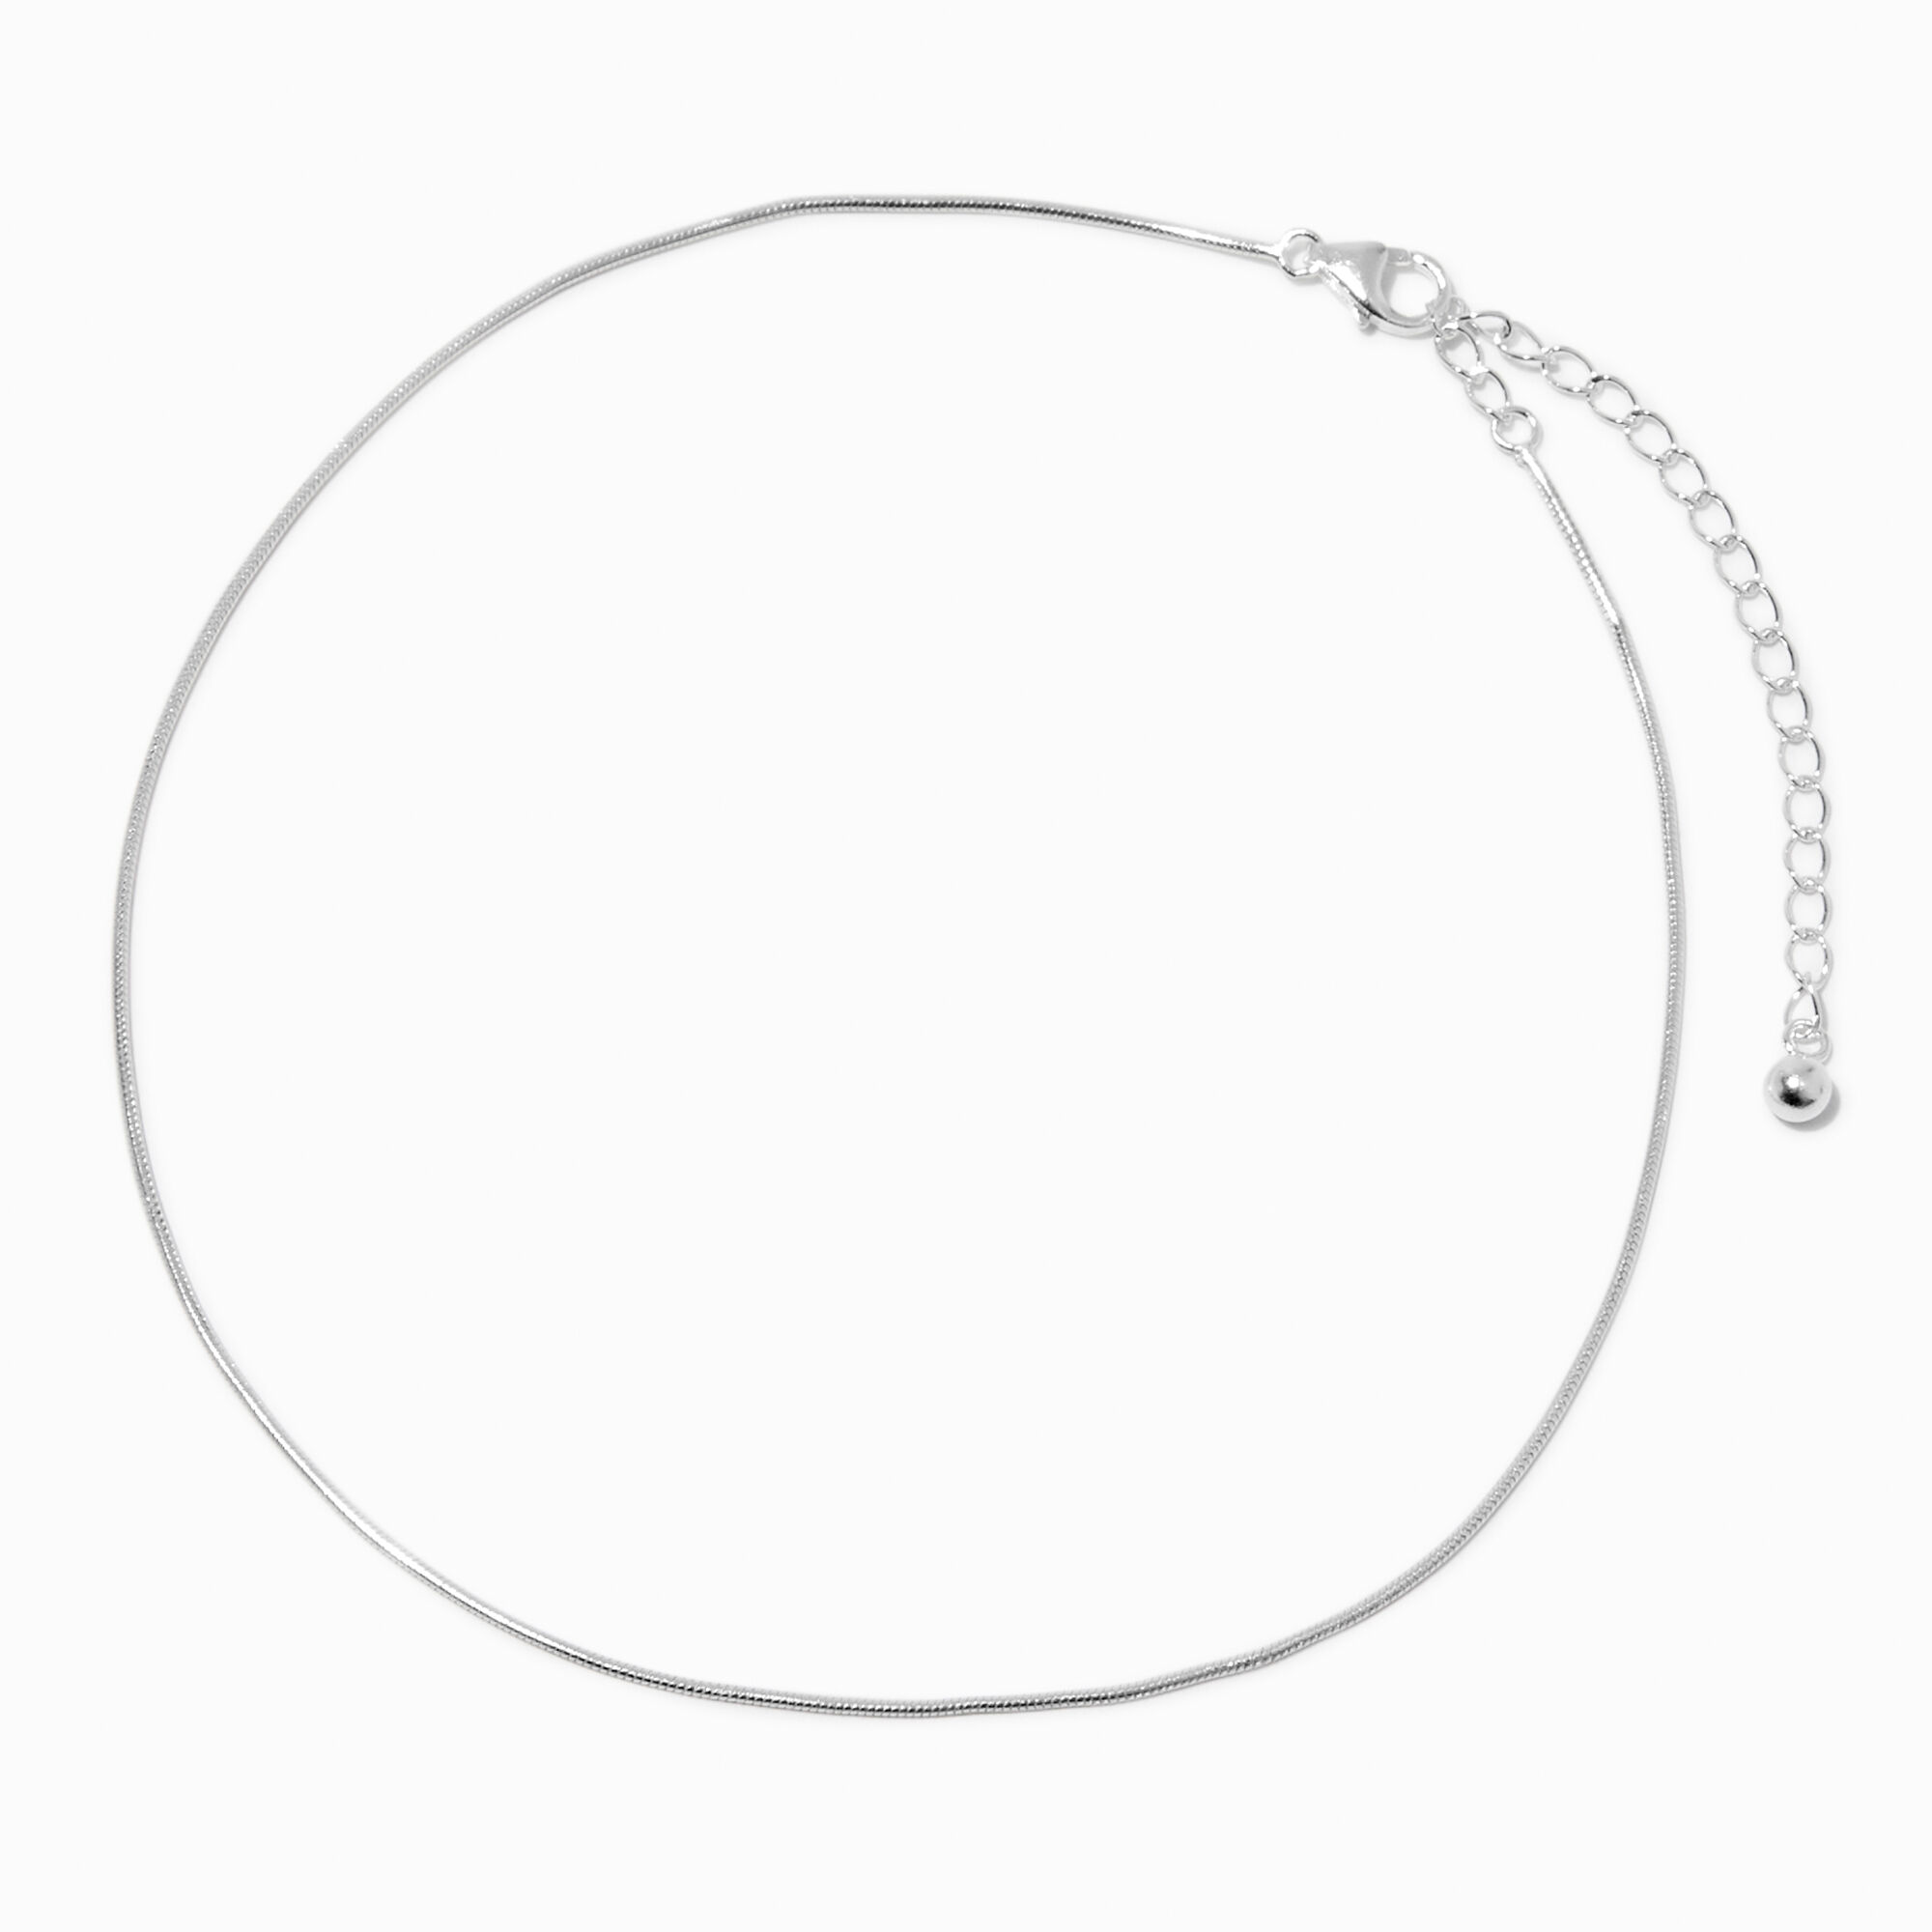 View C Luxe By Claires Dainty Snake Chain Anklet Silver information